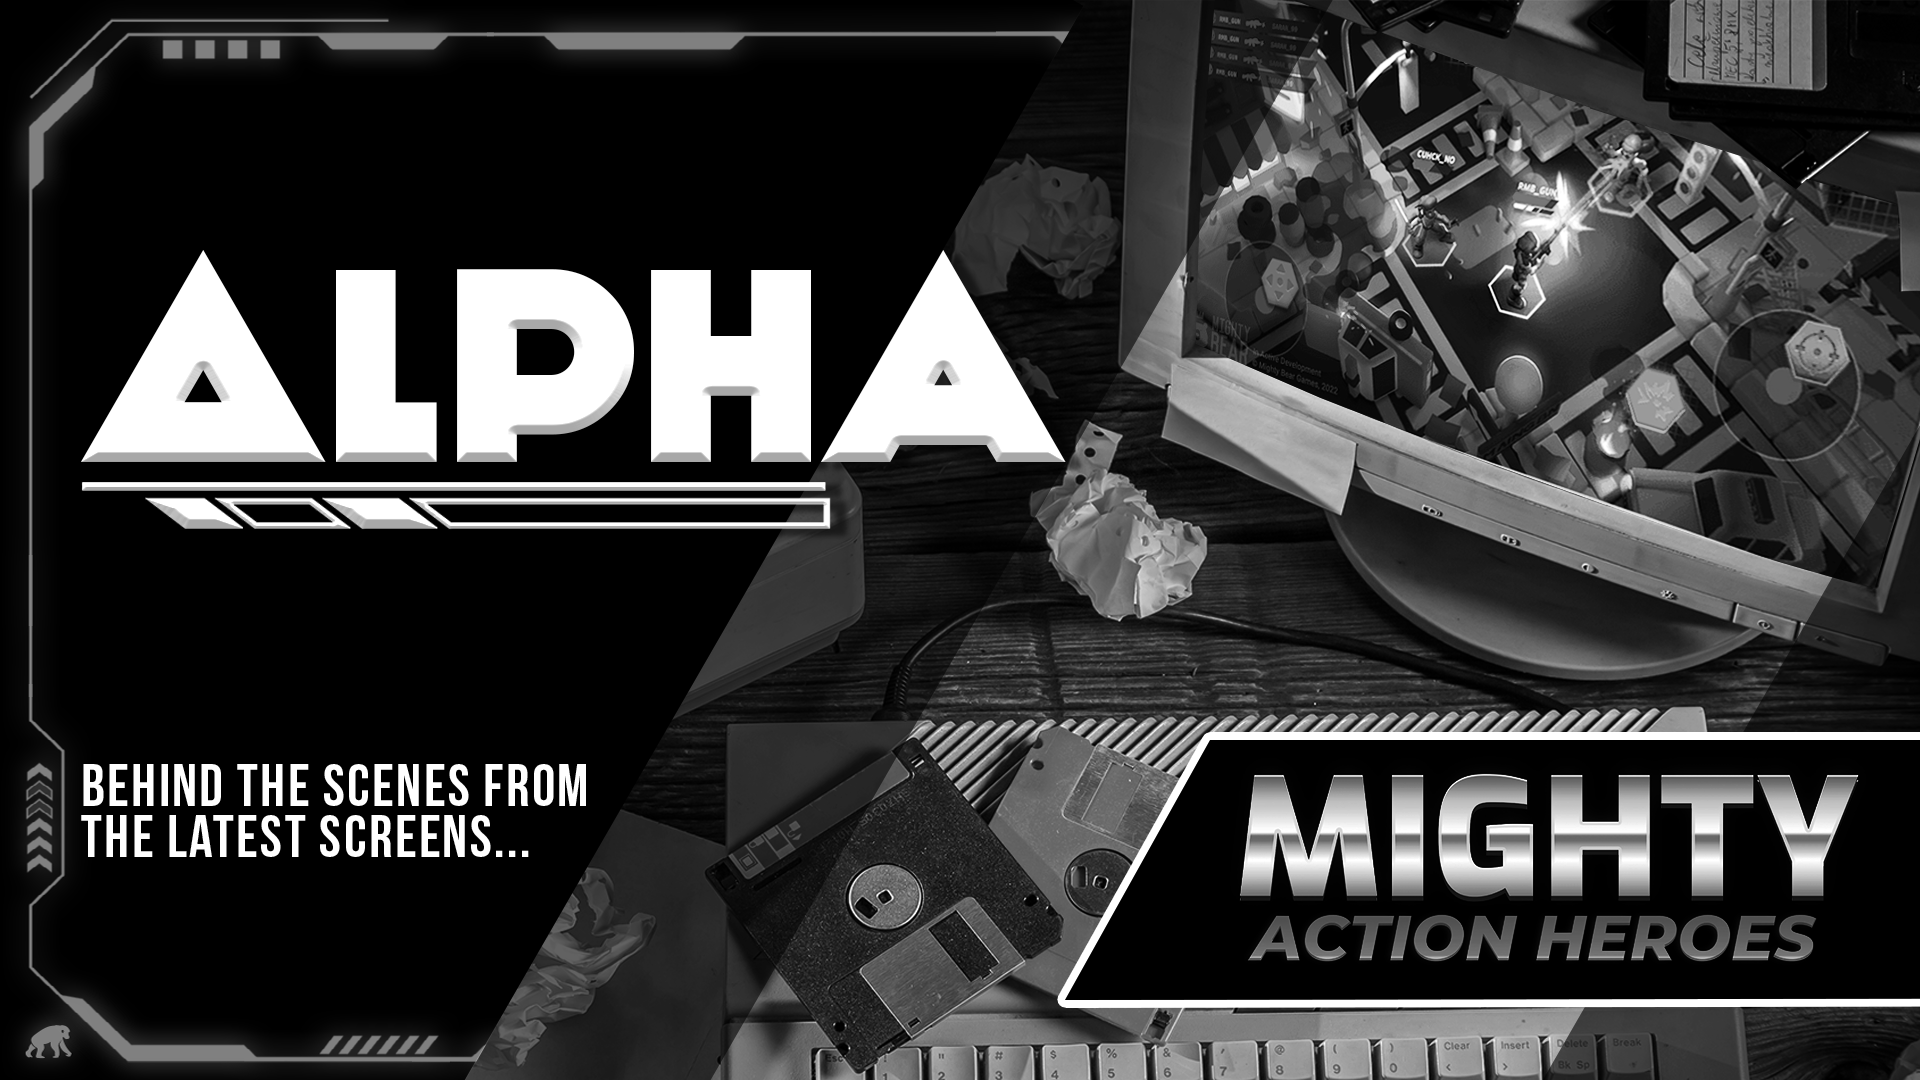 The Alpha: Mighty Action Heroes